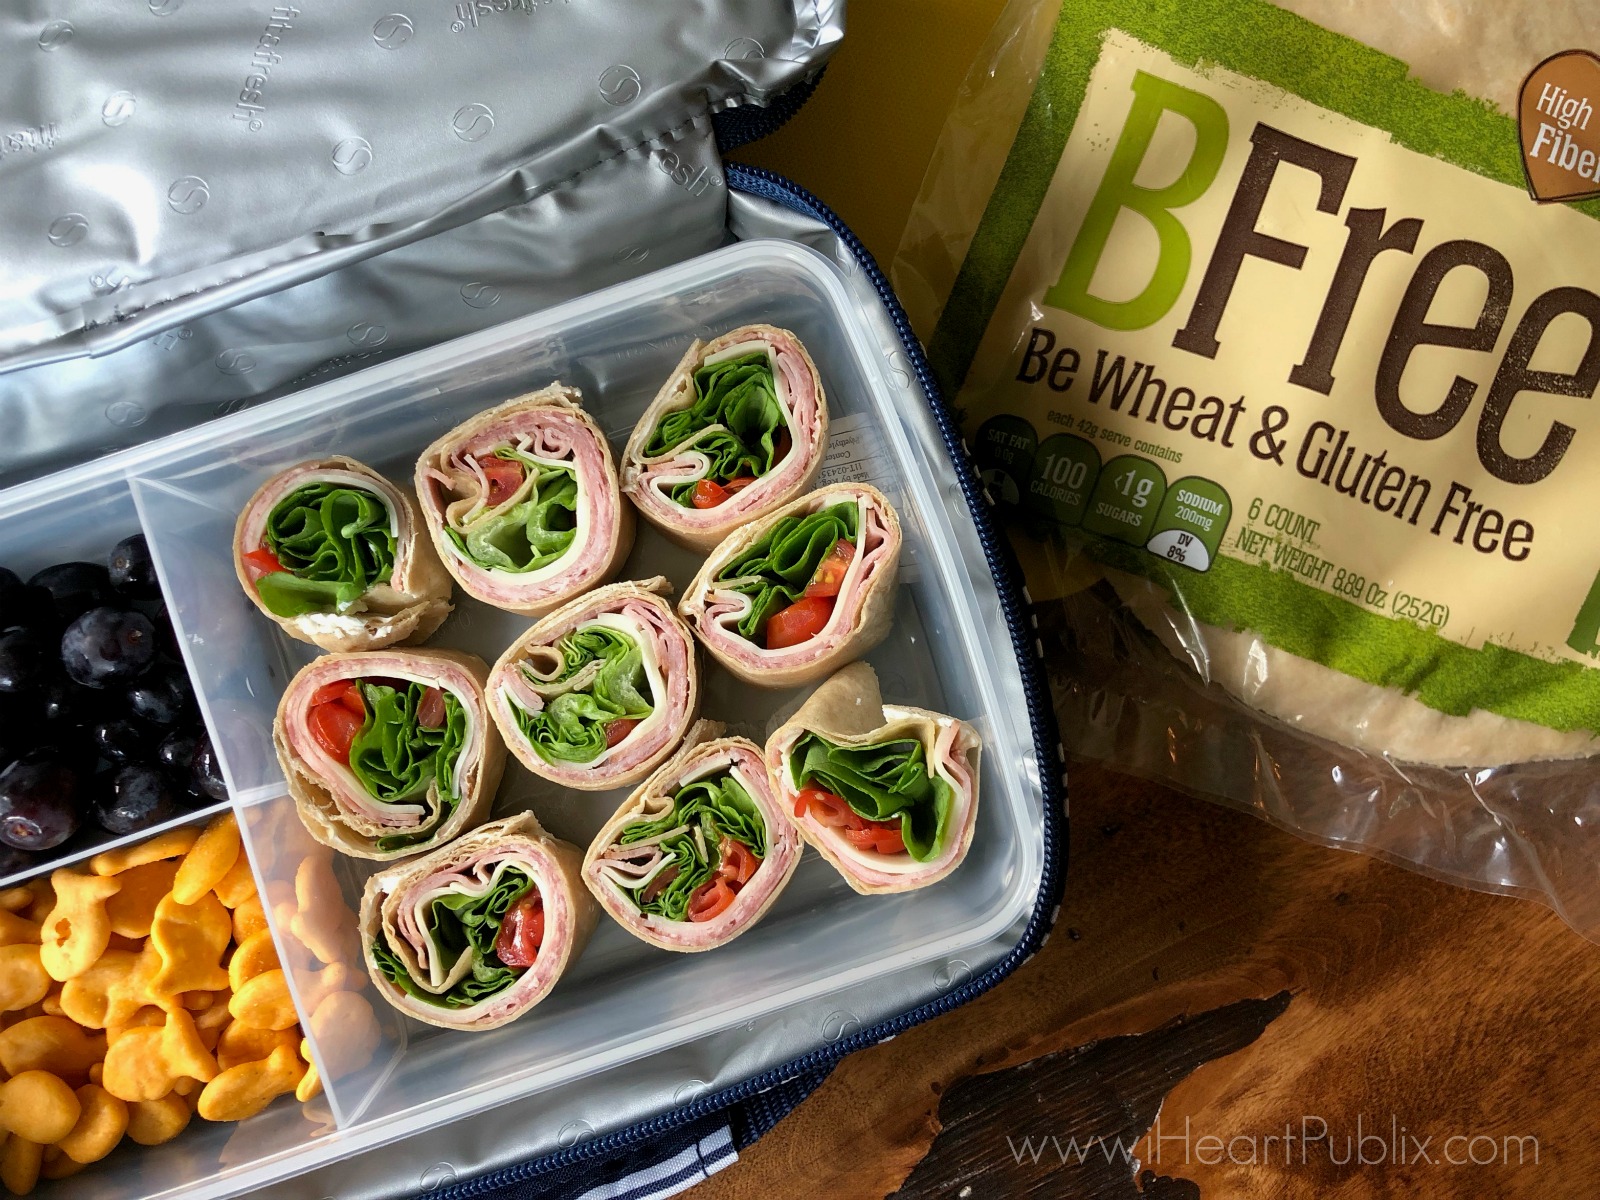 Save On BFree Rolls At Publix + Enter To Win A Back To School Prize Pack (Includes $50 Publix Gift Card - 3 Winners!) on I Heart Publix